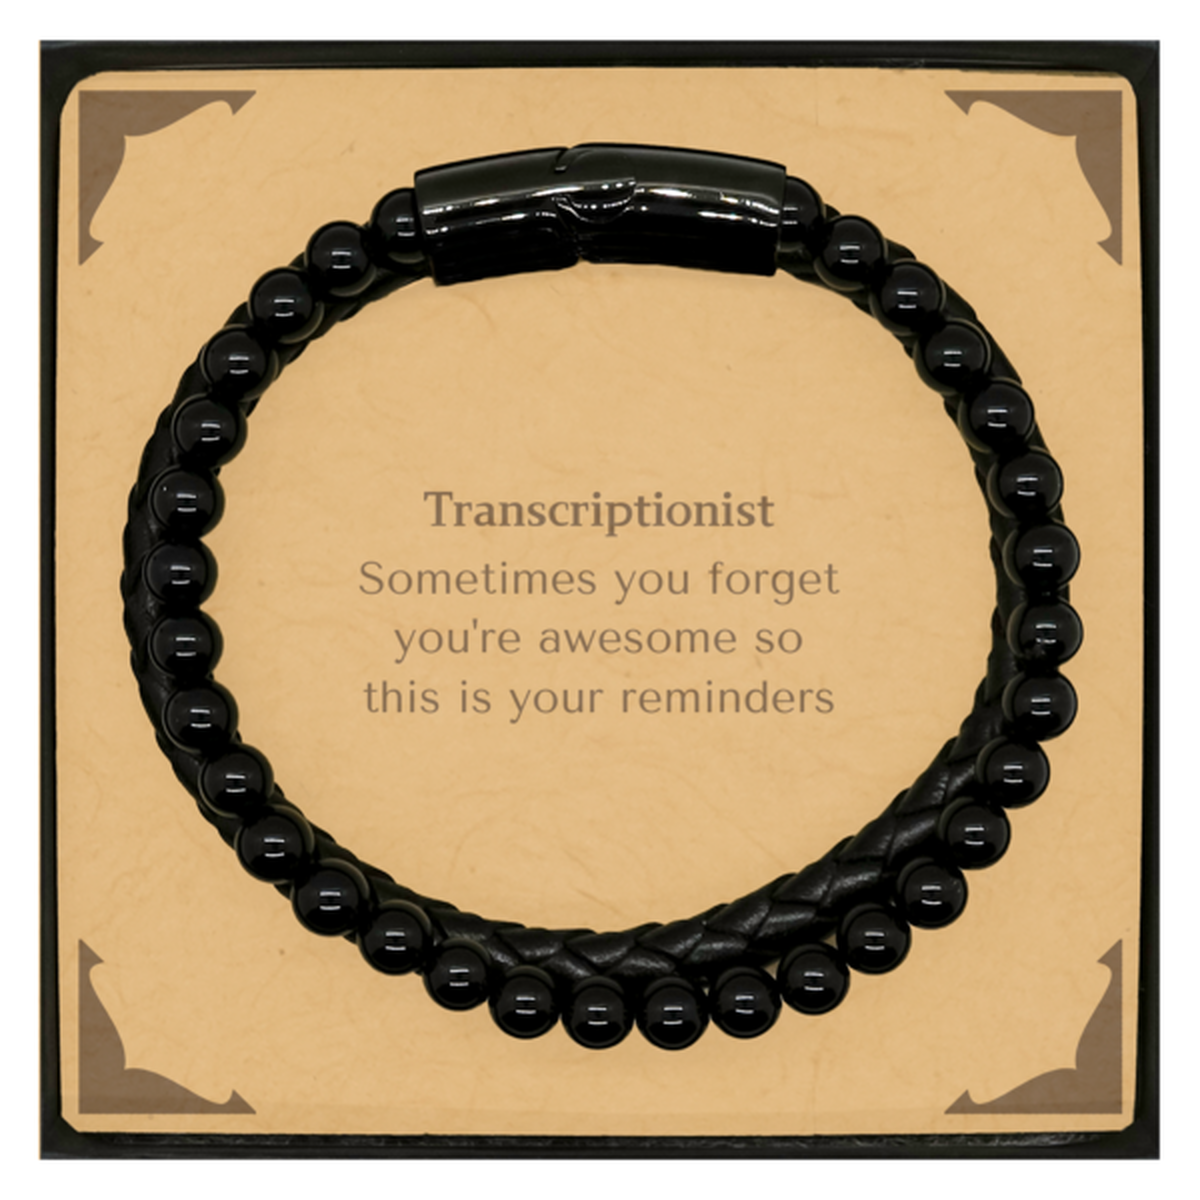 Sentimental Transcriptionist Stone Leather Bracelets, Transcriptionist Sometimes you forget you're awesome so this is your reminders, Graduation Christmas Birthday Gifts for Transcriptionist, Men, Women, Coworkers